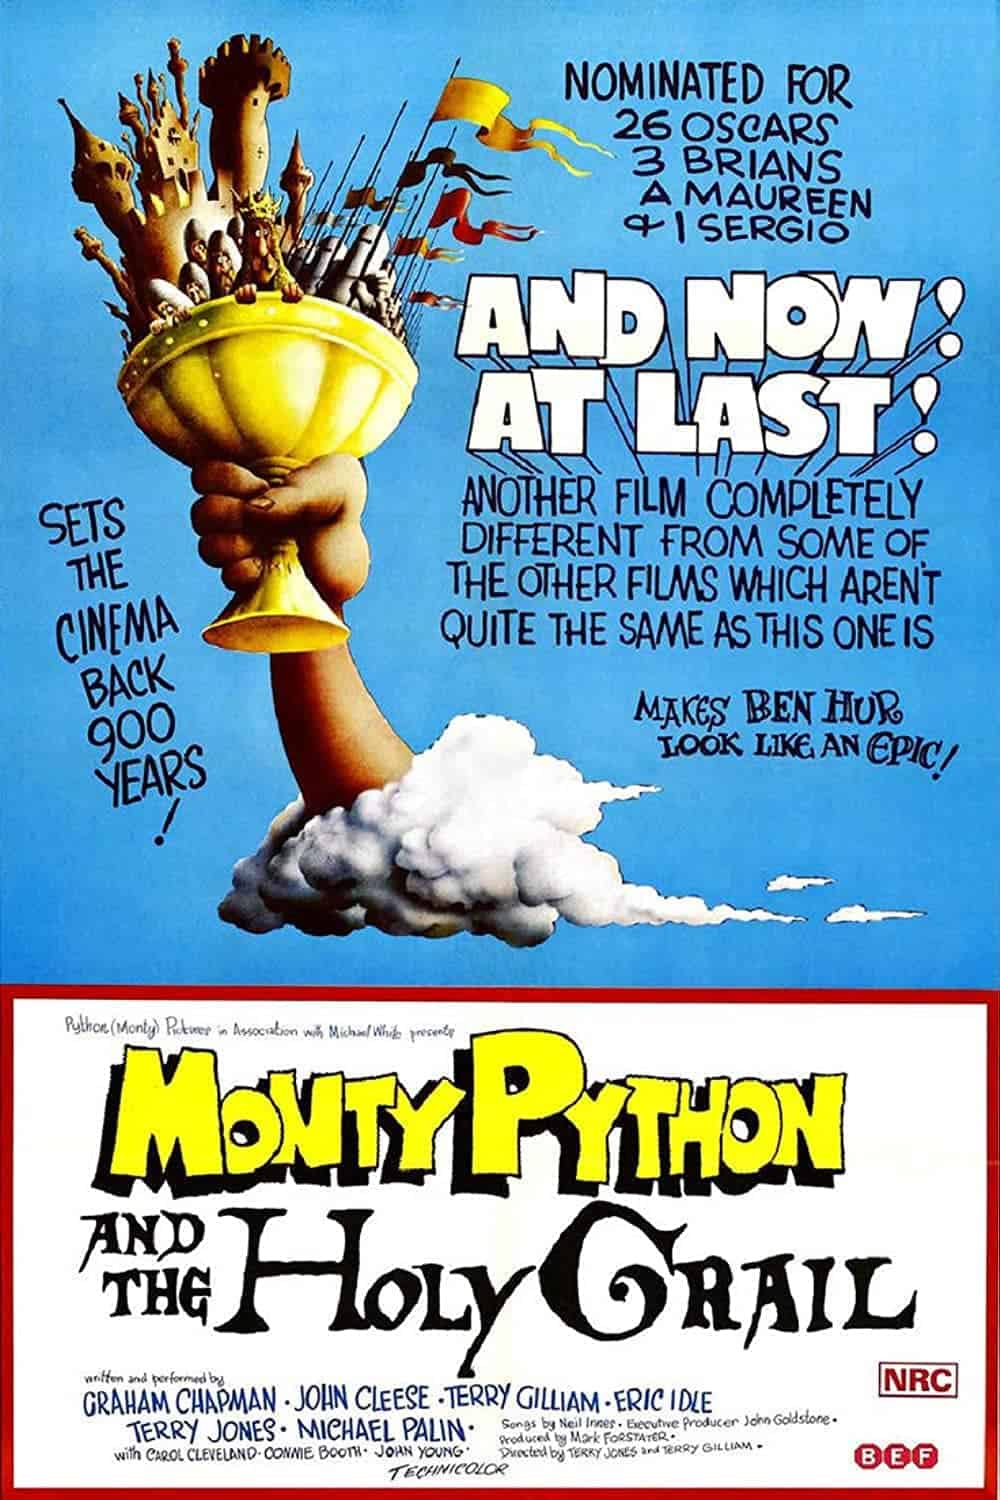 Monty Python And The Holy Grail (1975) Best Knight Movies to Add in Your Watchlist